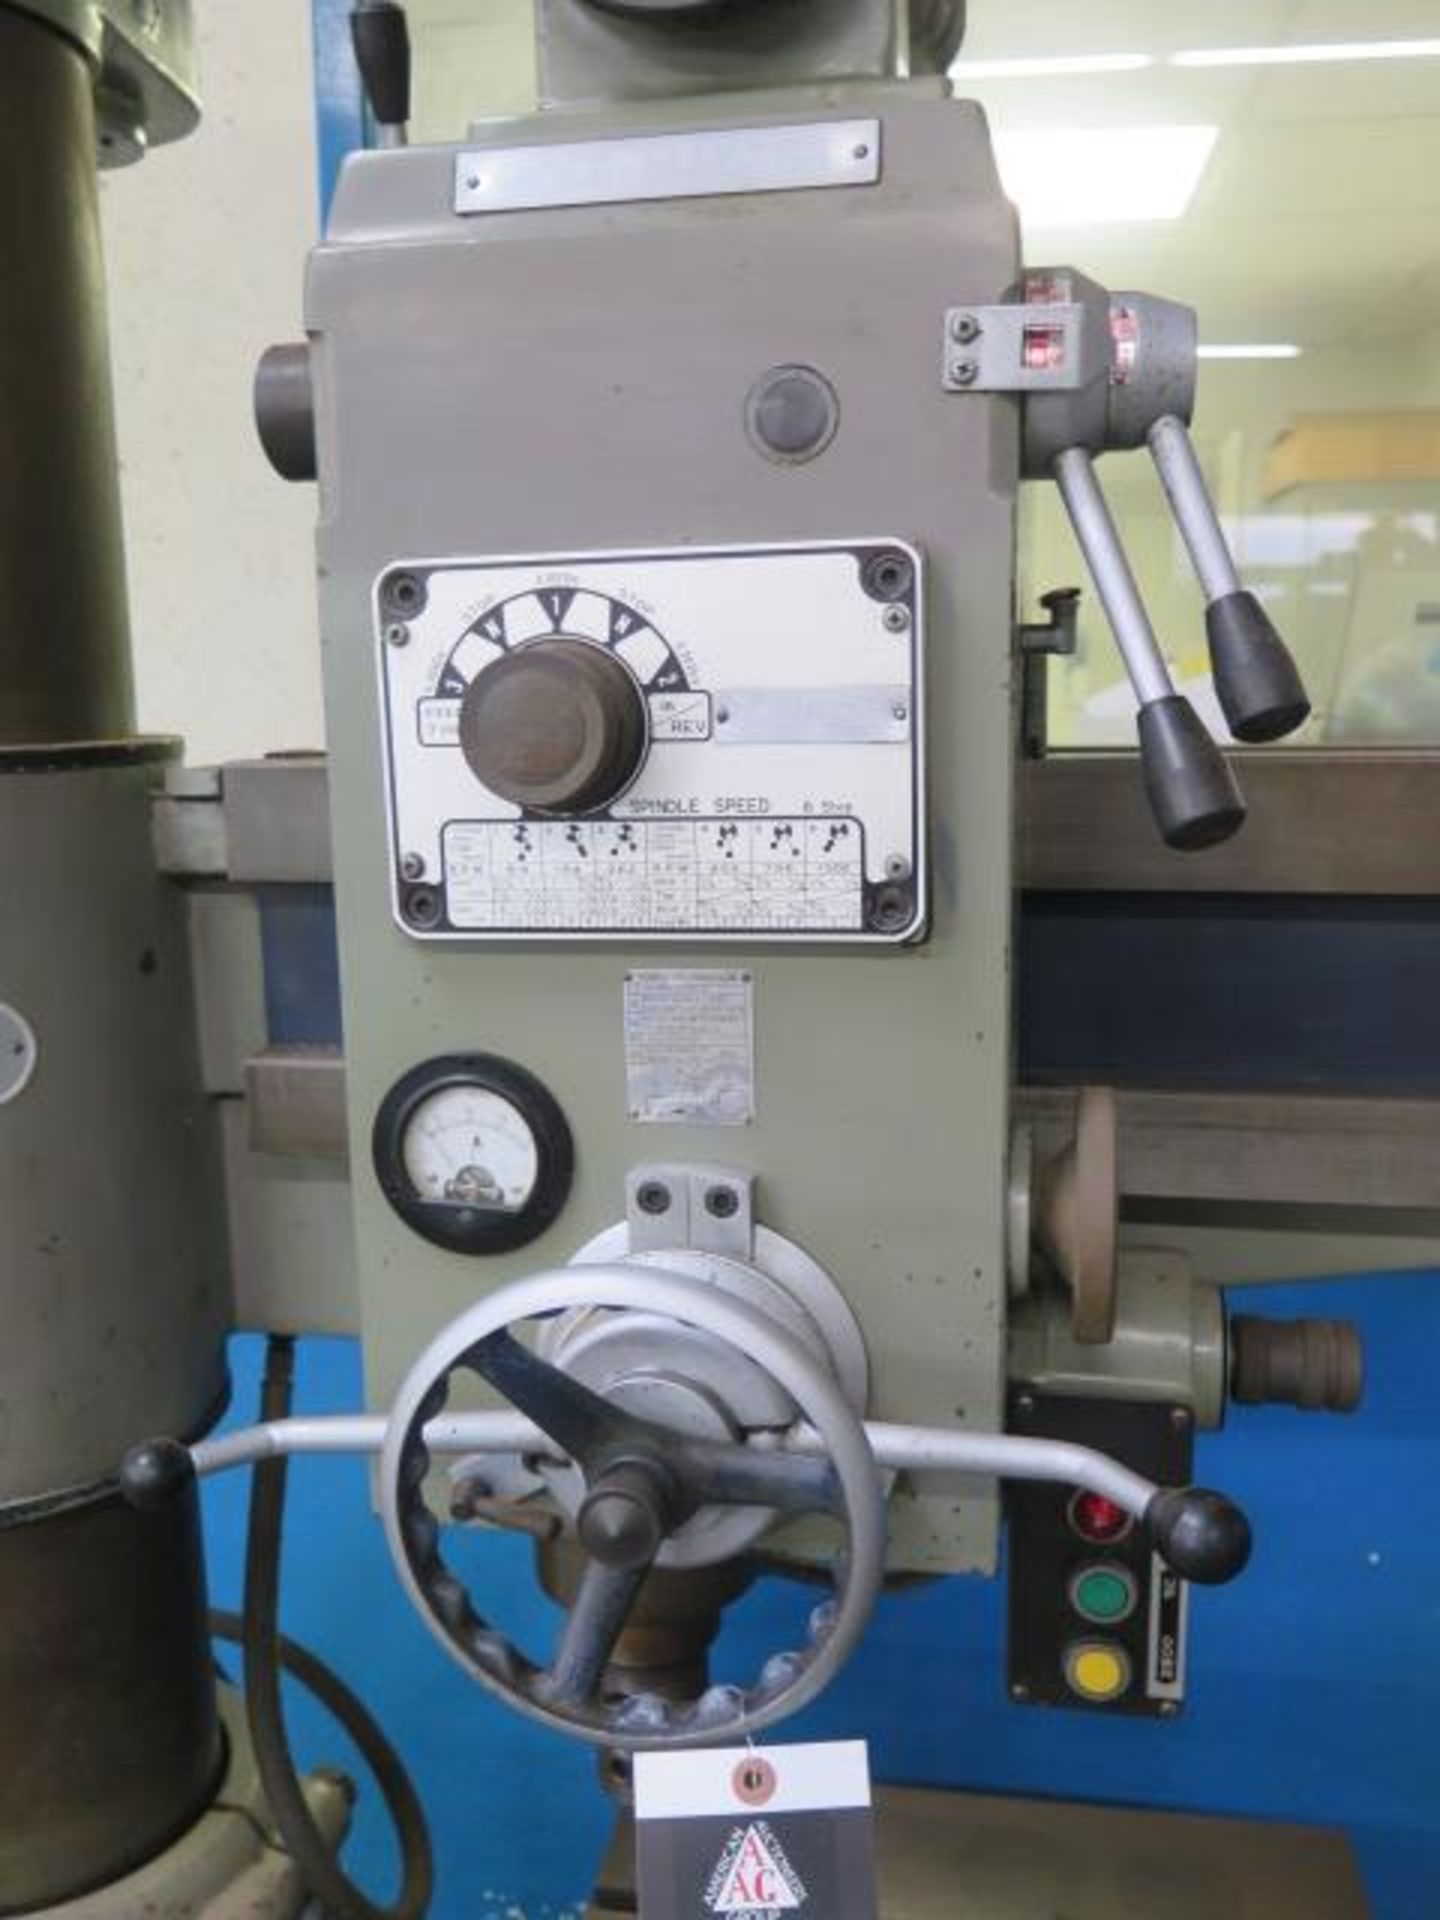 Diamond mdl. 800 “Hole Master” 8” Column x 20” Radial Arm Drill s/n 13322 w/ 88-1500 RPM, SOLD AS IS - Image 4 of 13